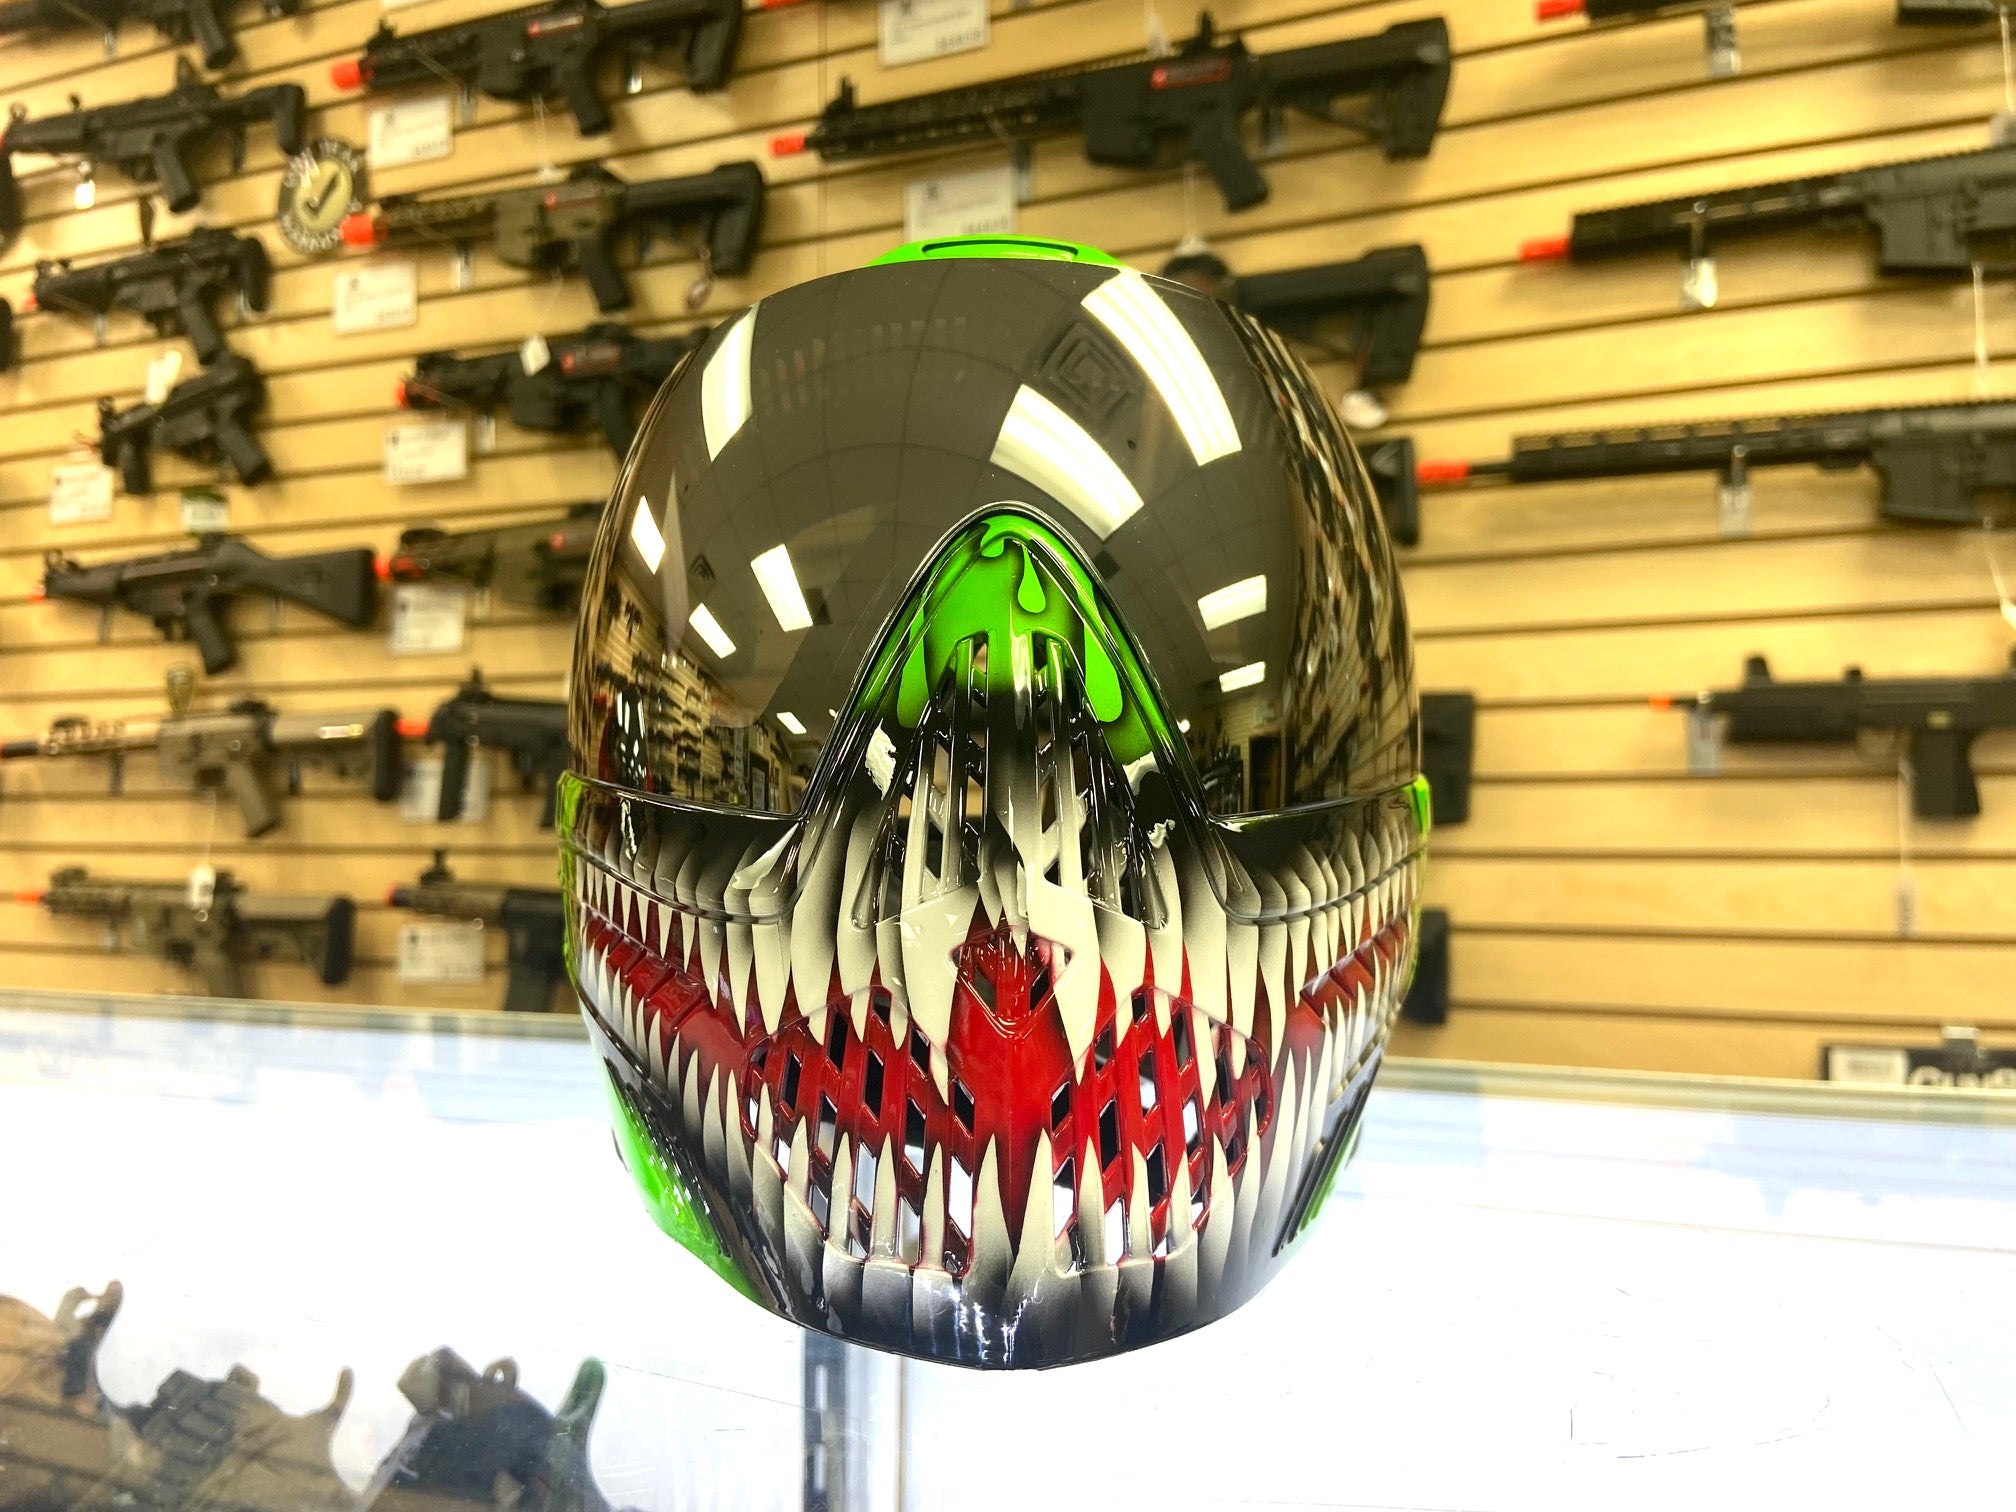 This Dye I5 mask is a custom painted masterpiece.  Durable paintjob on the best mask in the game! Get yours only at SS Airsoft. Let's Get It!!